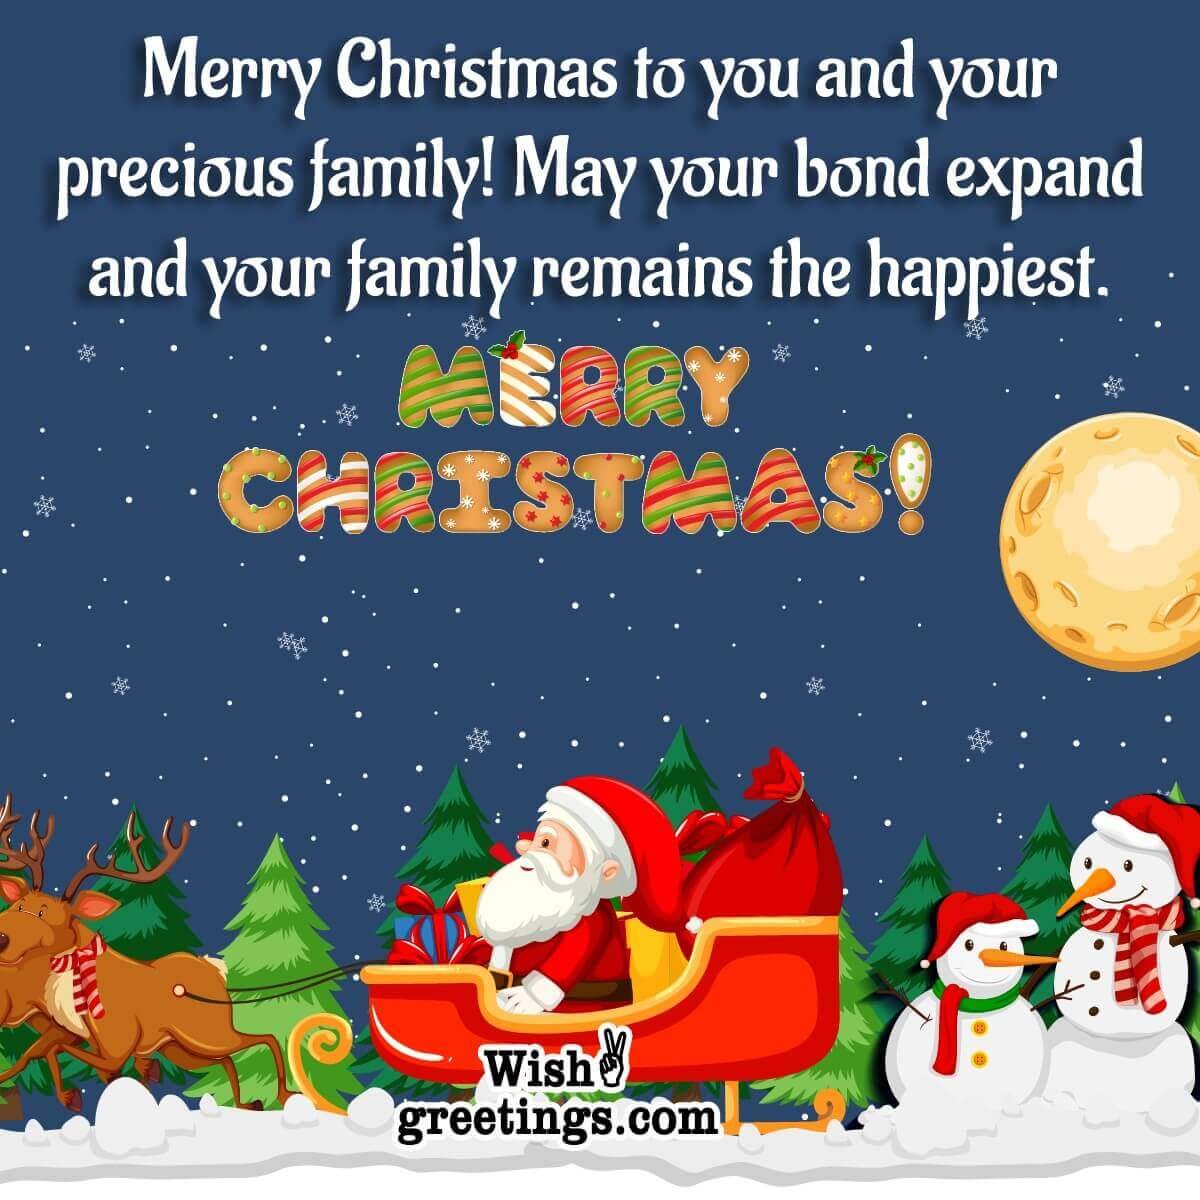 Wonderful Christmas Wish Image For Best Friends